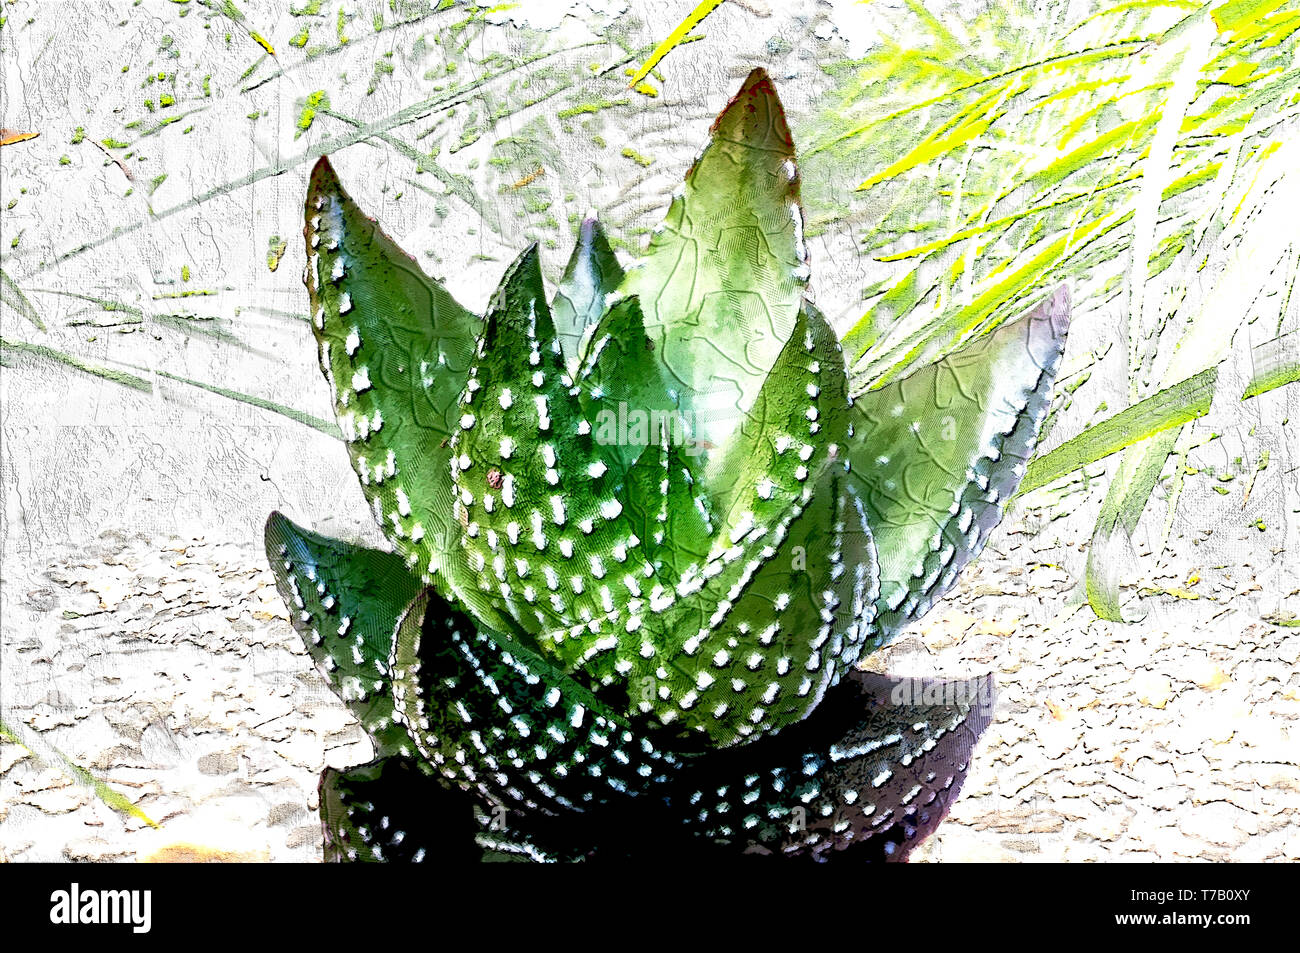 Digitally enhanced image of a Haworthia reinwardtii (Zebra Wart), showing its rosette of succulent and stiff leaves with thorns. The juice of the leav Stock Photo